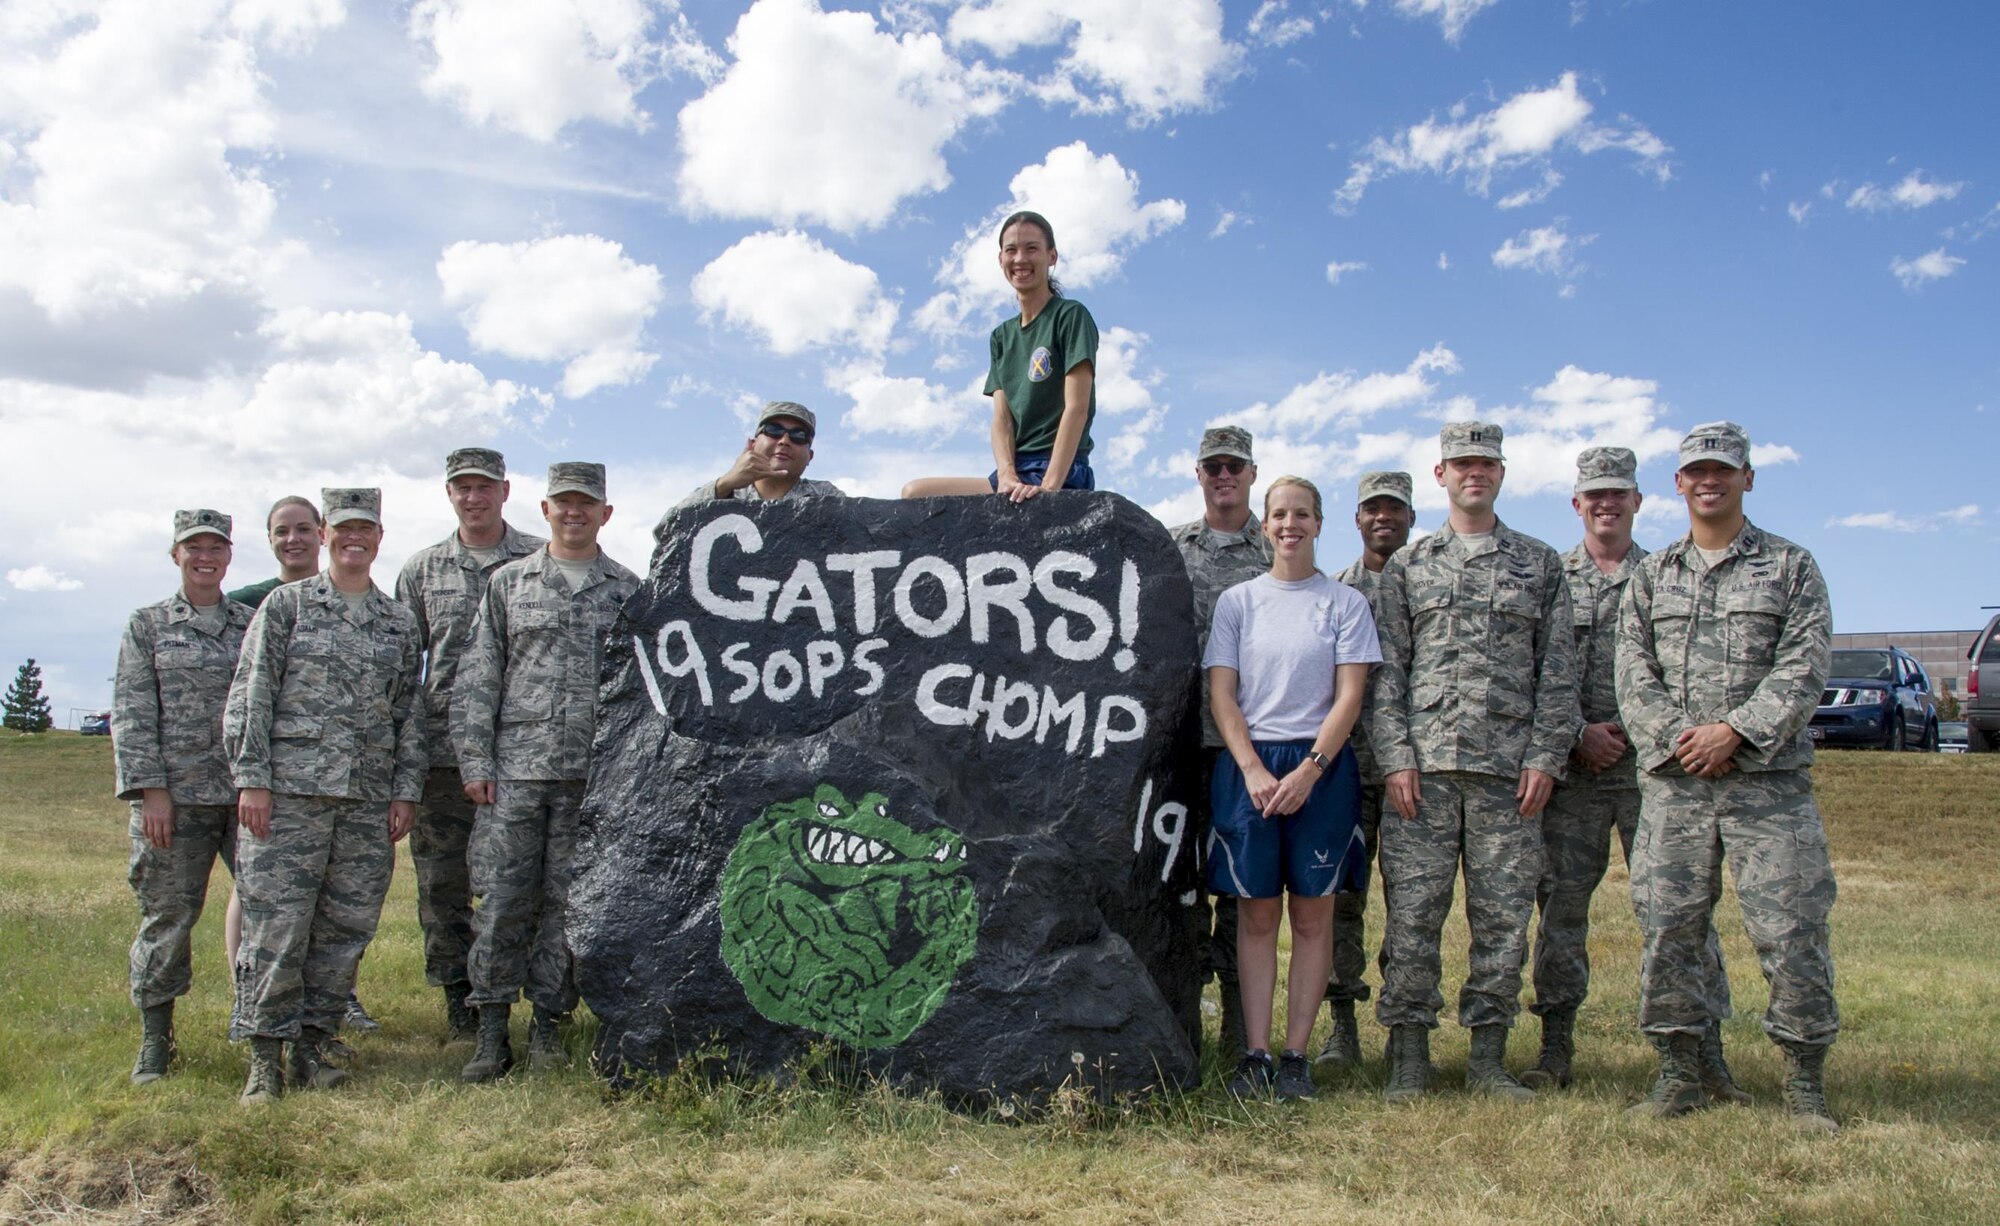 Reserve Citizen Airmen from the 19th Space Operations Squadron pose with the newly painted Spirit Rock on Thursday, Sep. 14, 2017.